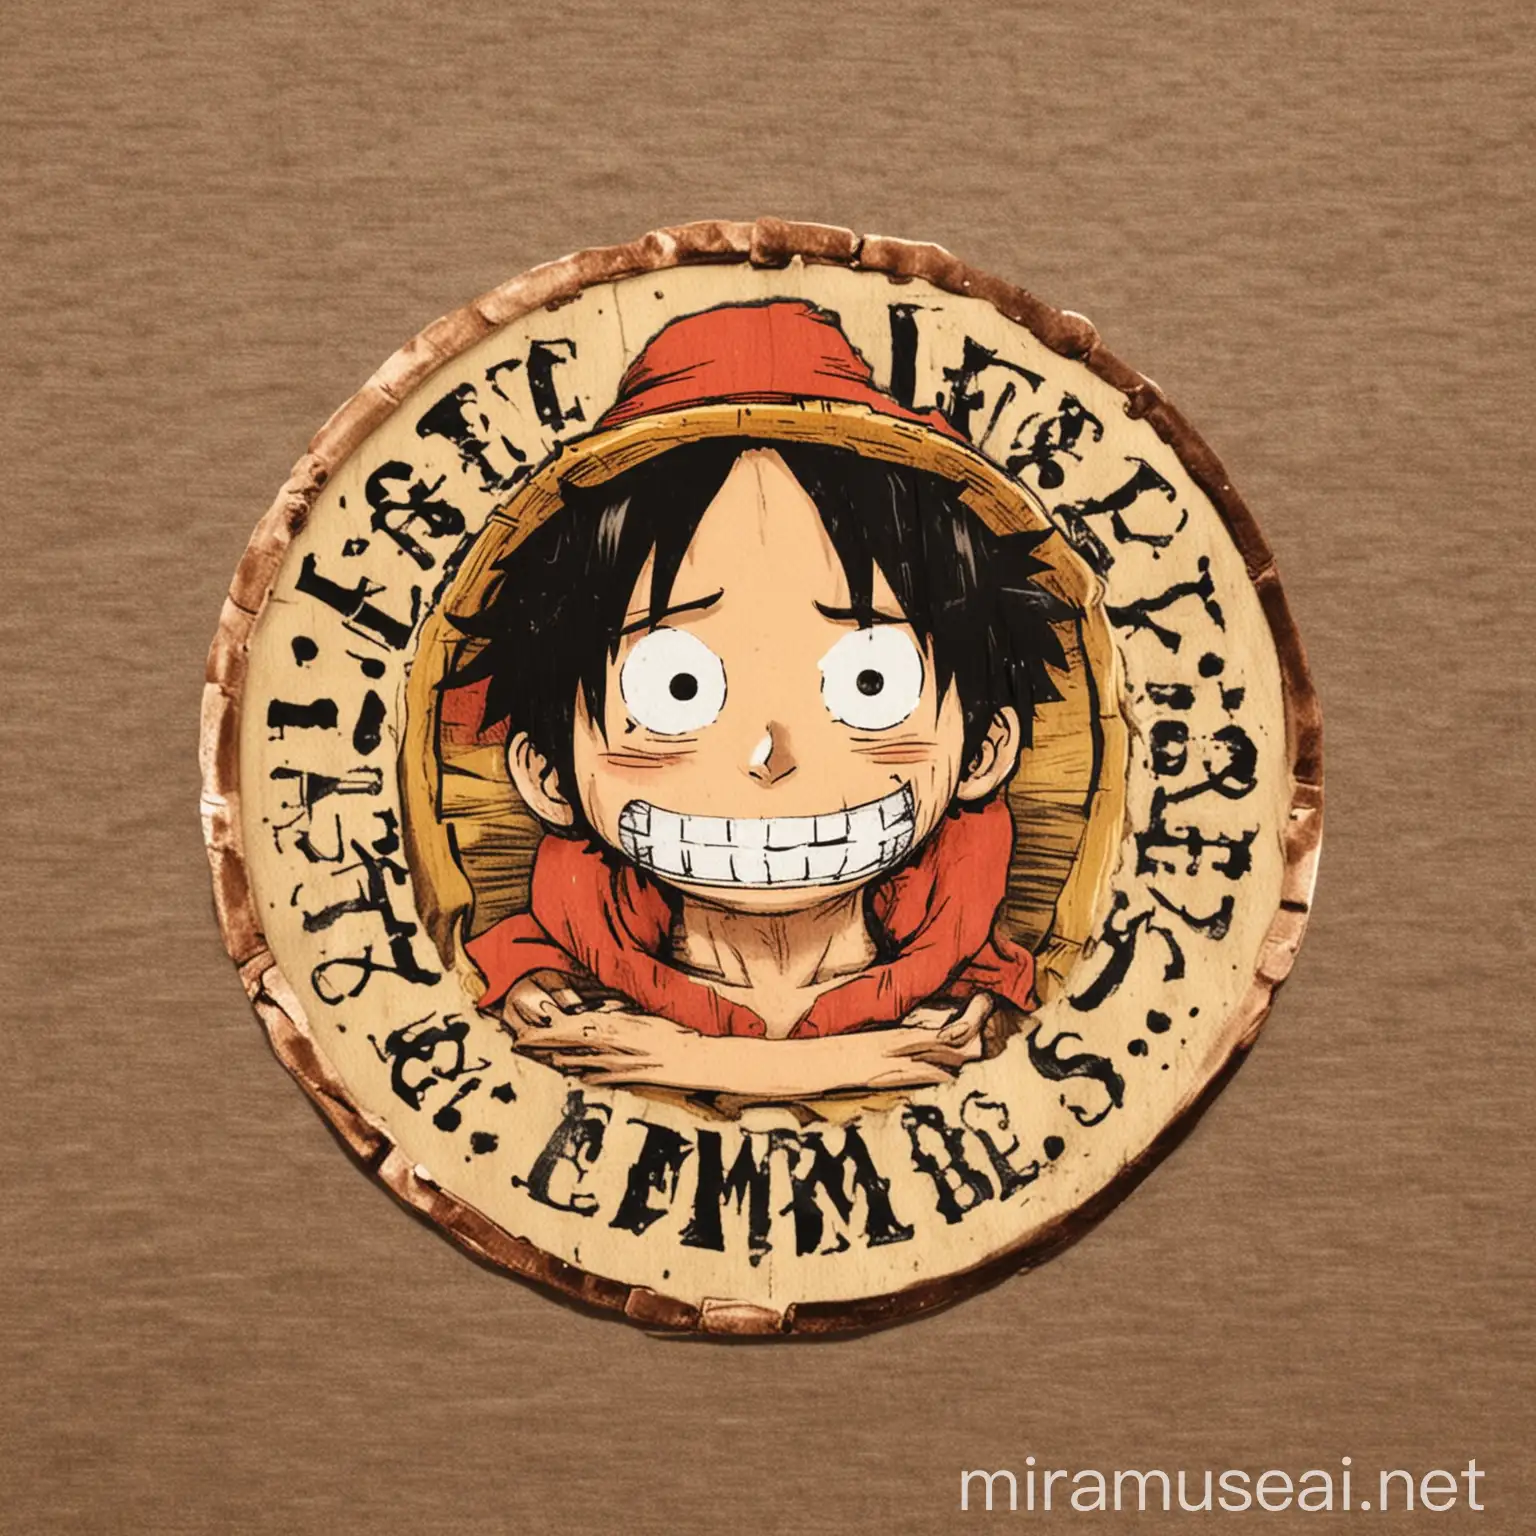 Luffy Logo at Thrift Shop with Embabs Name